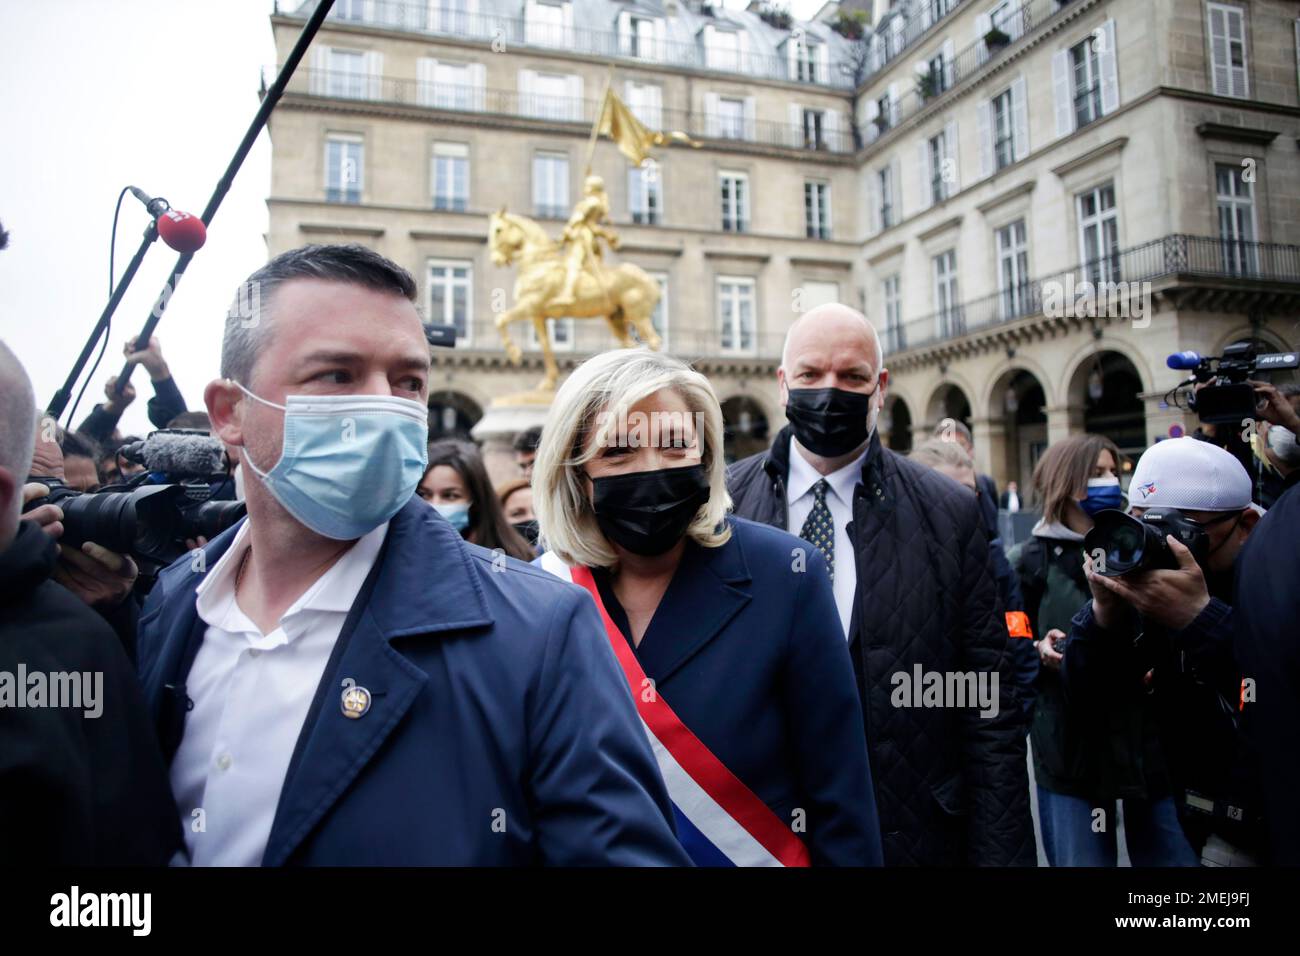 French far-right leader Marine le Pen, center, wearing a protective face  mask, leaves the statue of Joan of Arc after laying a wreath during a  ceremony Saturday, May 1, 2021 in Paris.